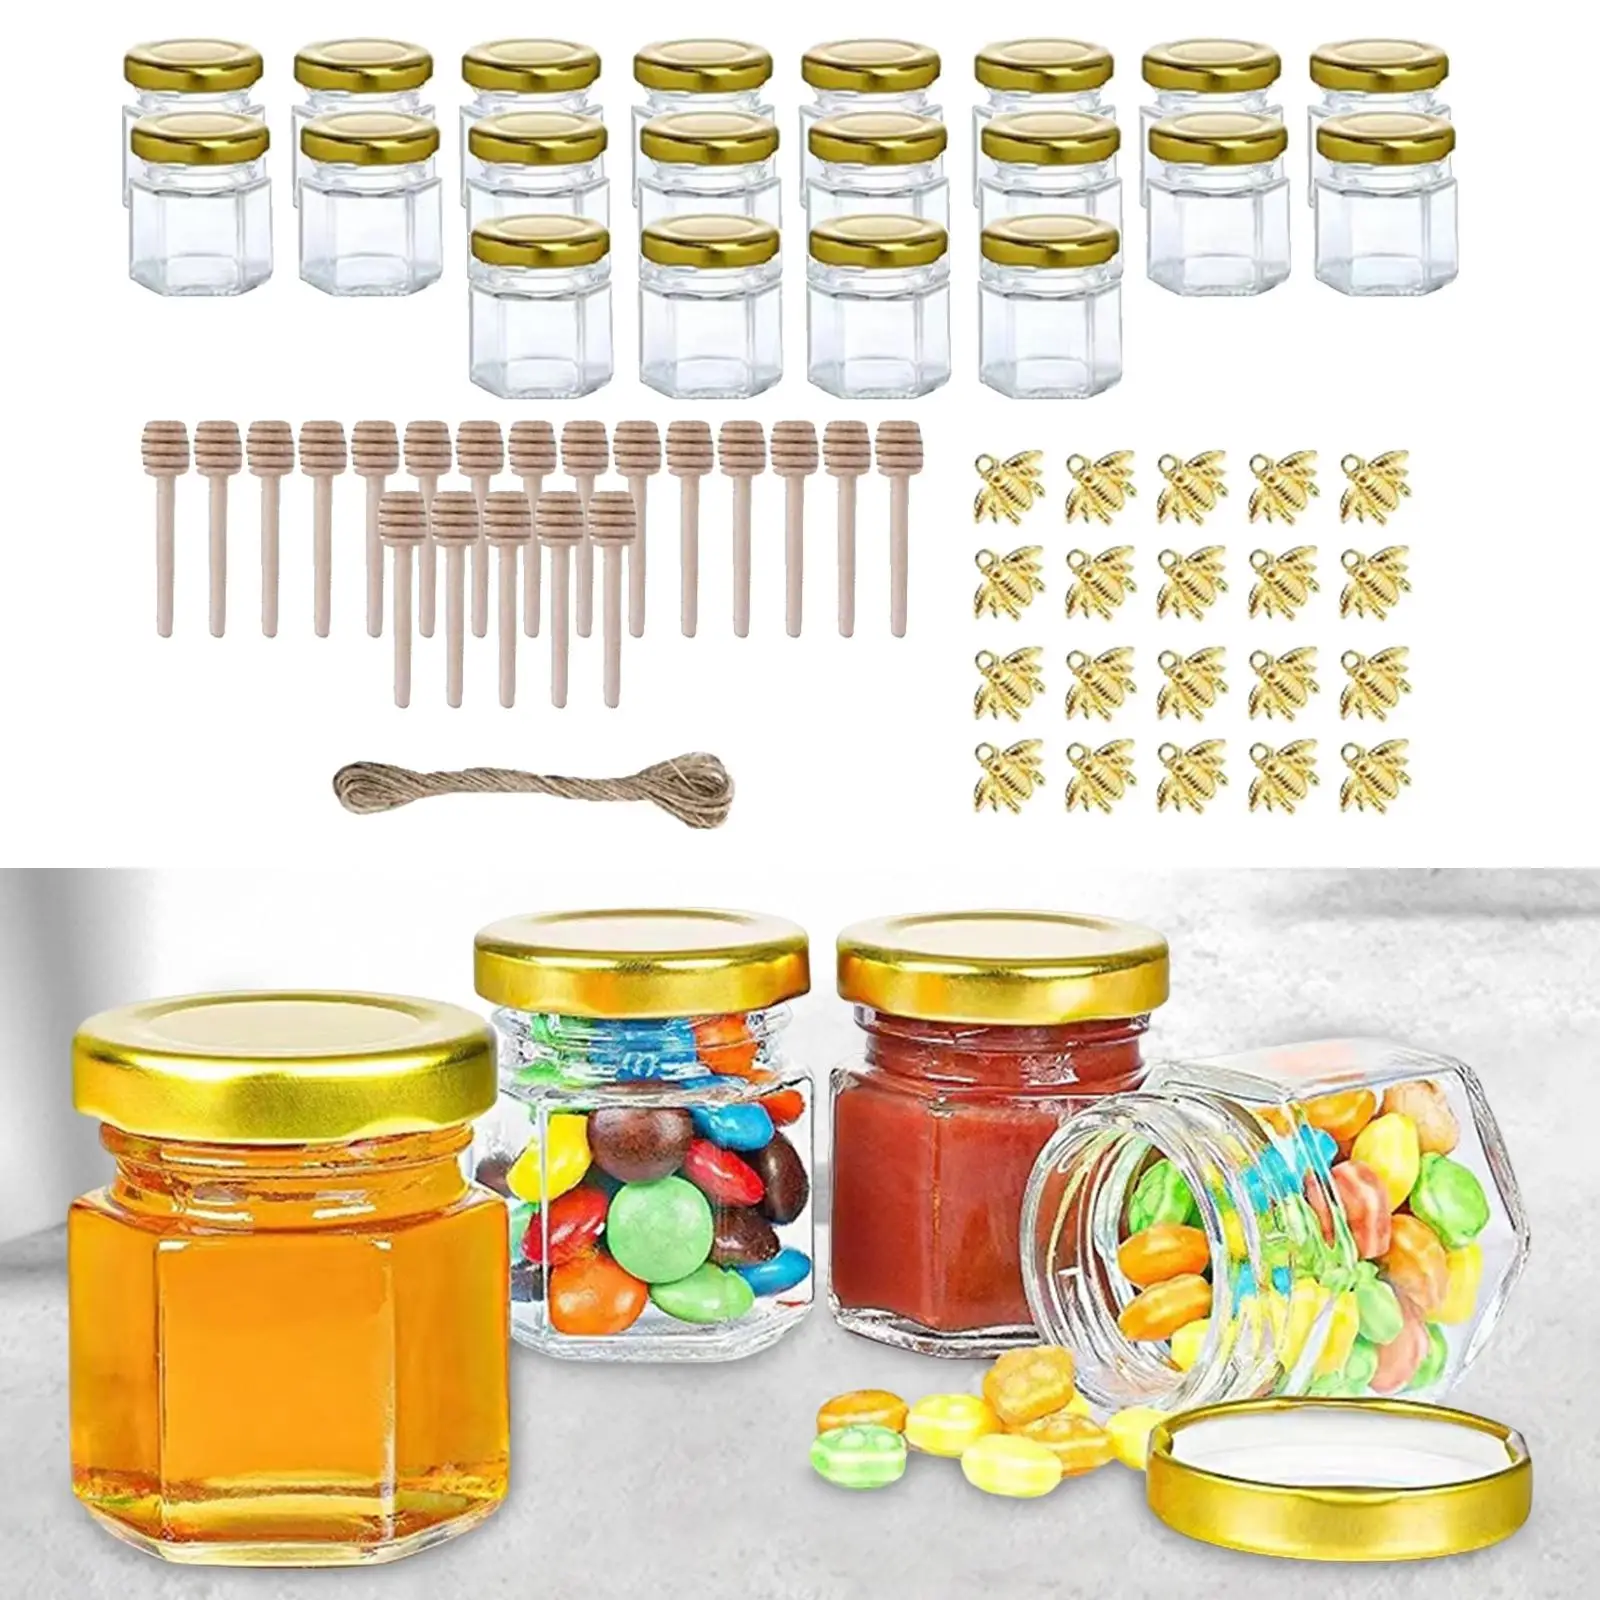 20 Pieces Small Glass Jars 45ml/1.5oz for Canning, Storing, and Decorative